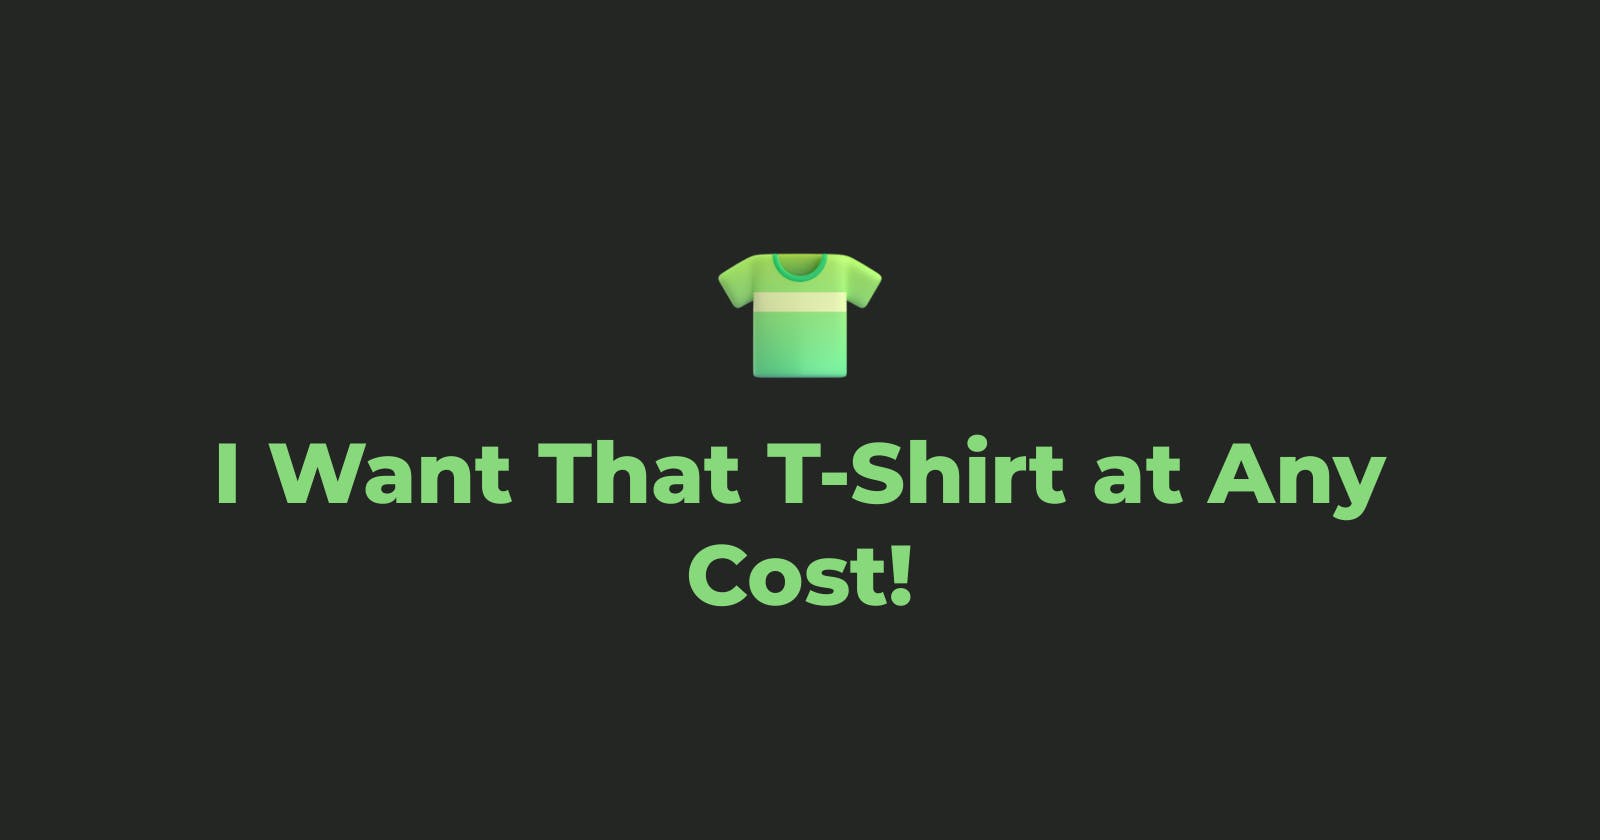 I Want That T-Shirt at Any Cost!